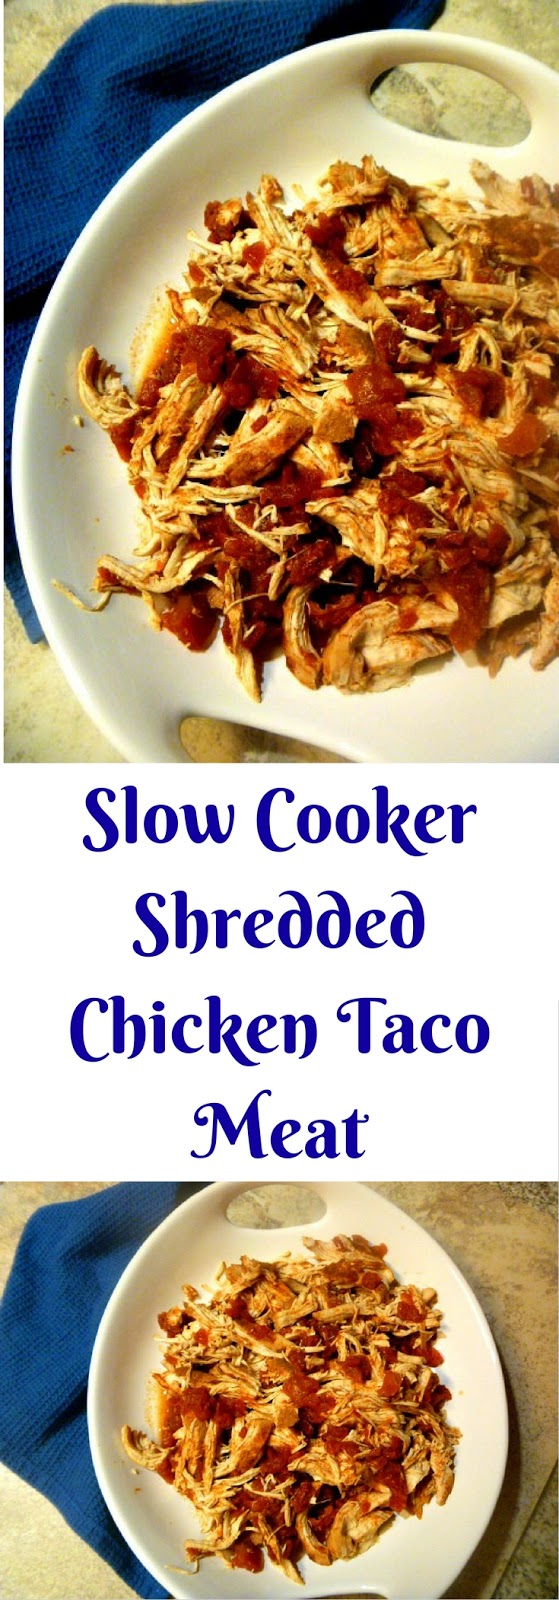 Slice of Southern: Slow Cooker Shredded Chicken Taco Meat